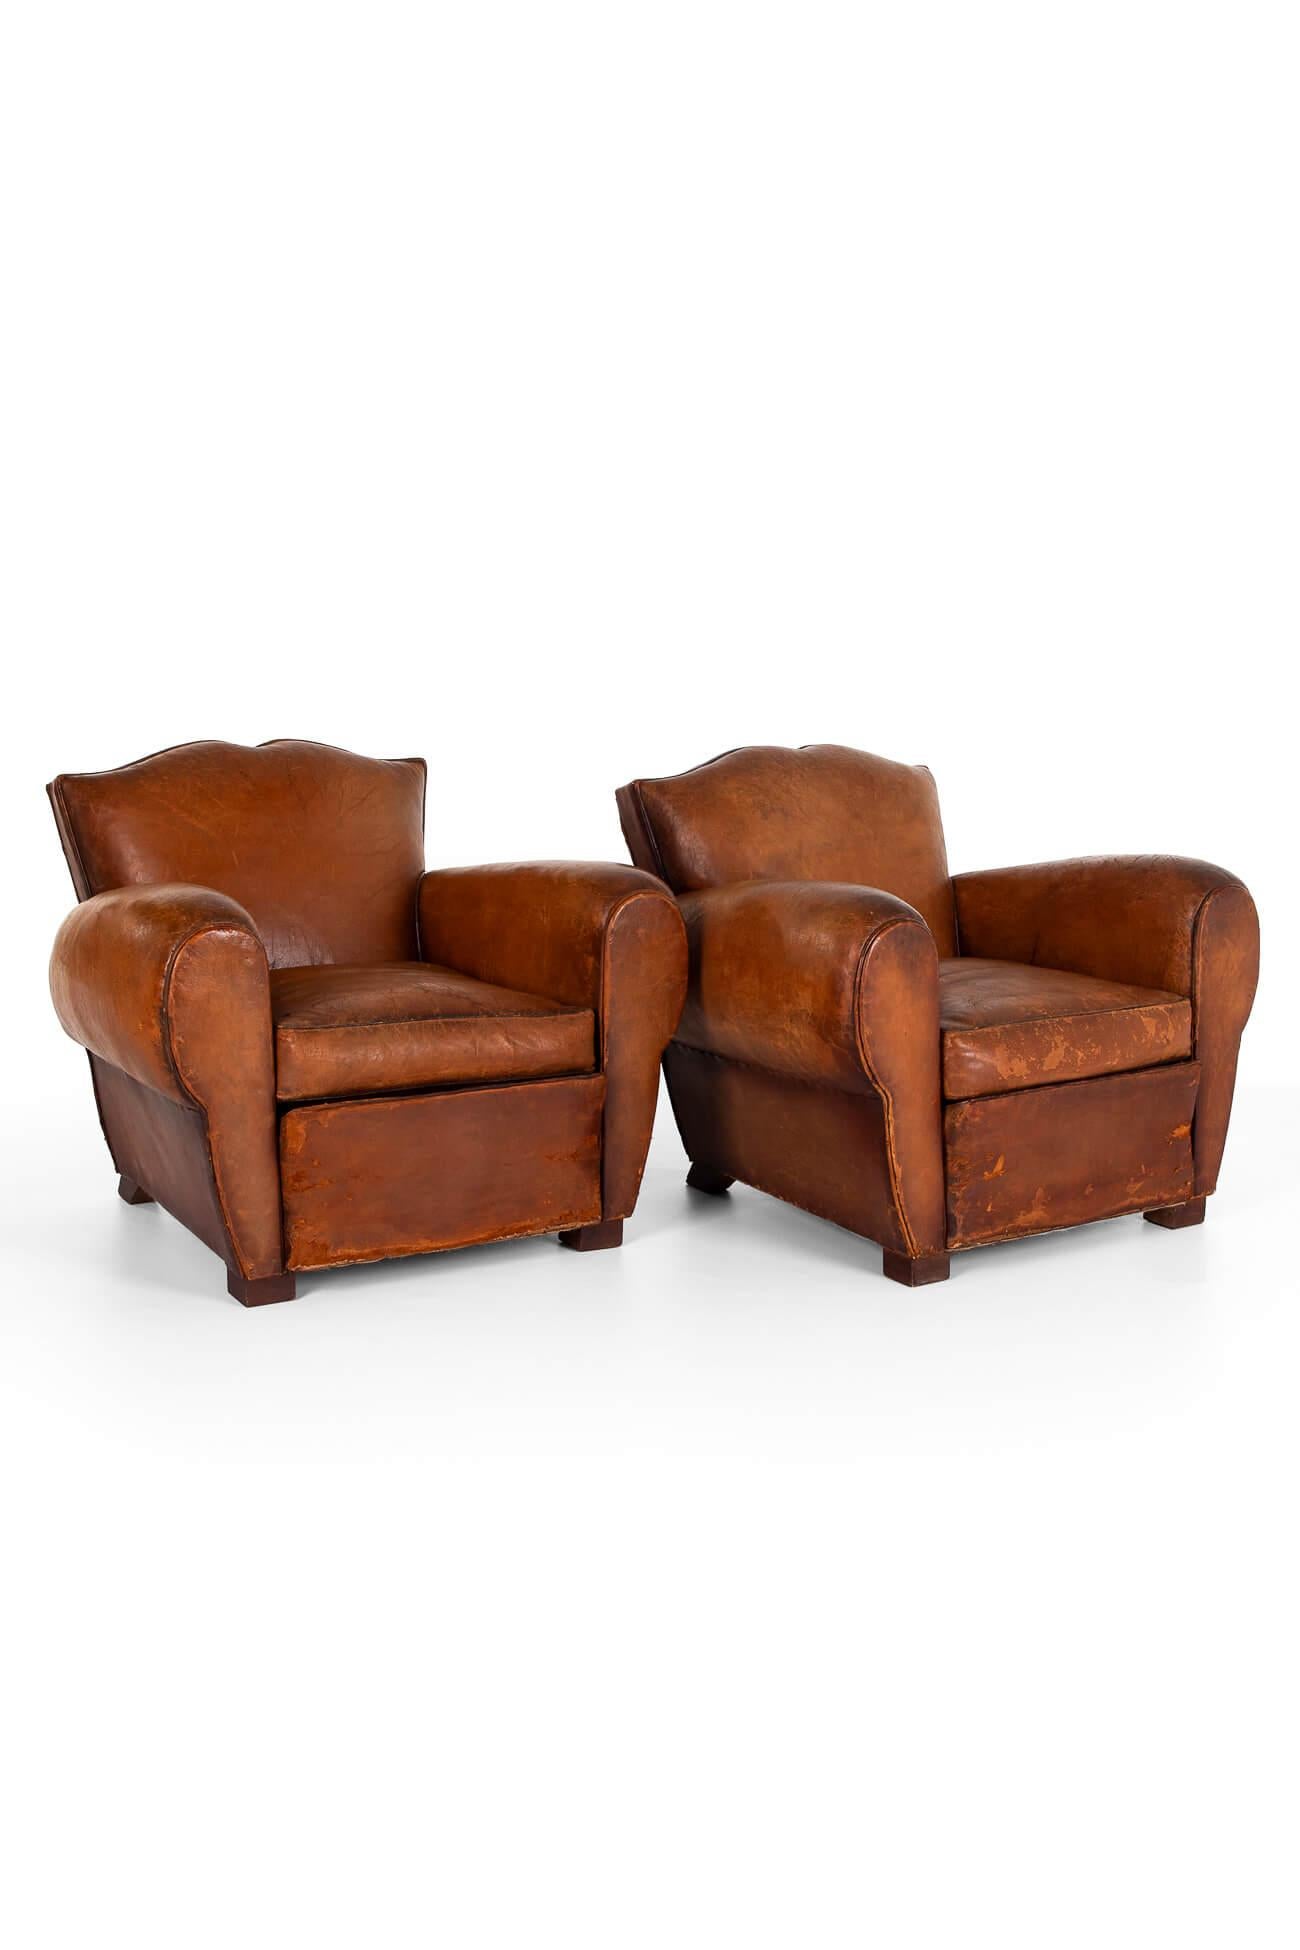 British Pair of Moustache back Club Chairs